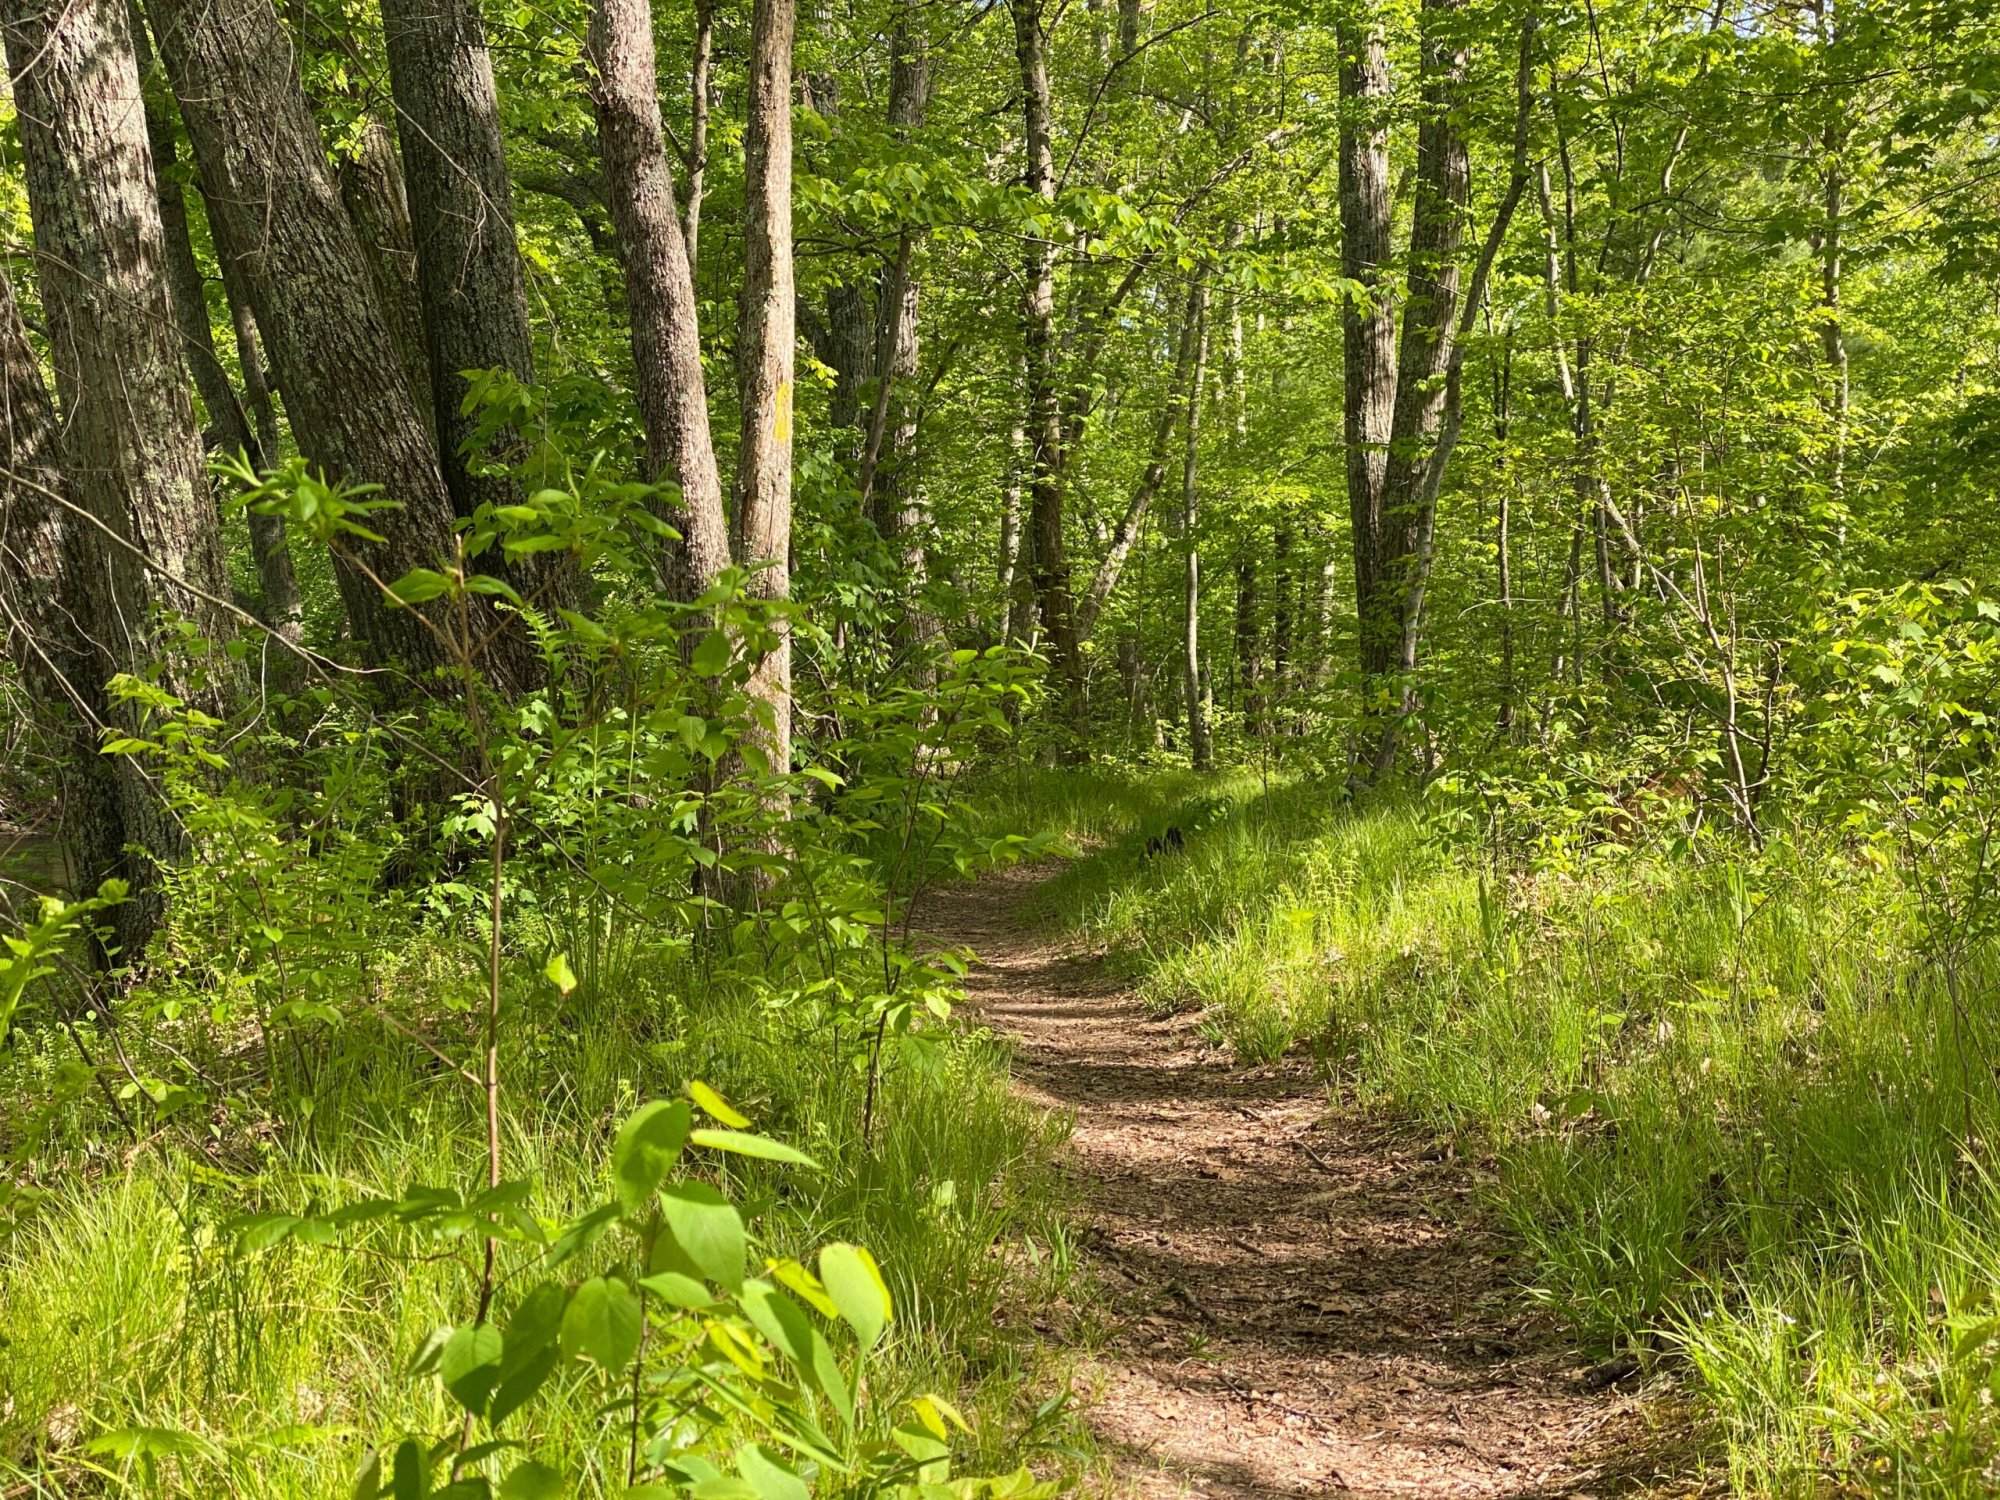 A trail in the woods with green grass and trees.